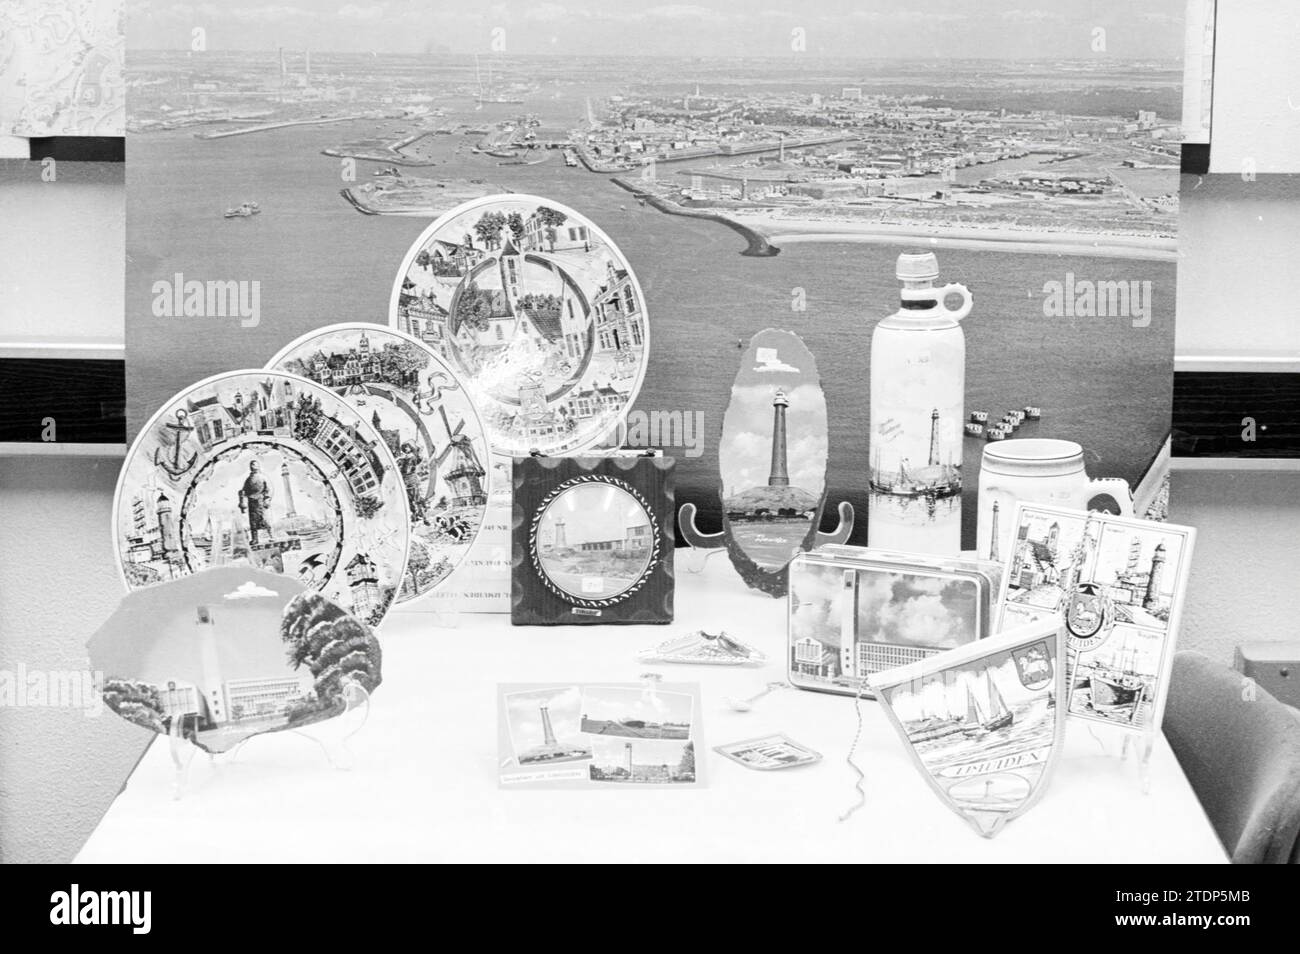 Collection of tableware with illustrations of coastal towns, 00-07-1983, Whizgle News from the Past, Tailored for the Future. Explore historical narratives, Dutch The Netherlands agency image with a modern perspective, bridging the gap between yesterday's events and tomorrow's insights. A timeless journey shaping the stories that shape our future Stock Photo